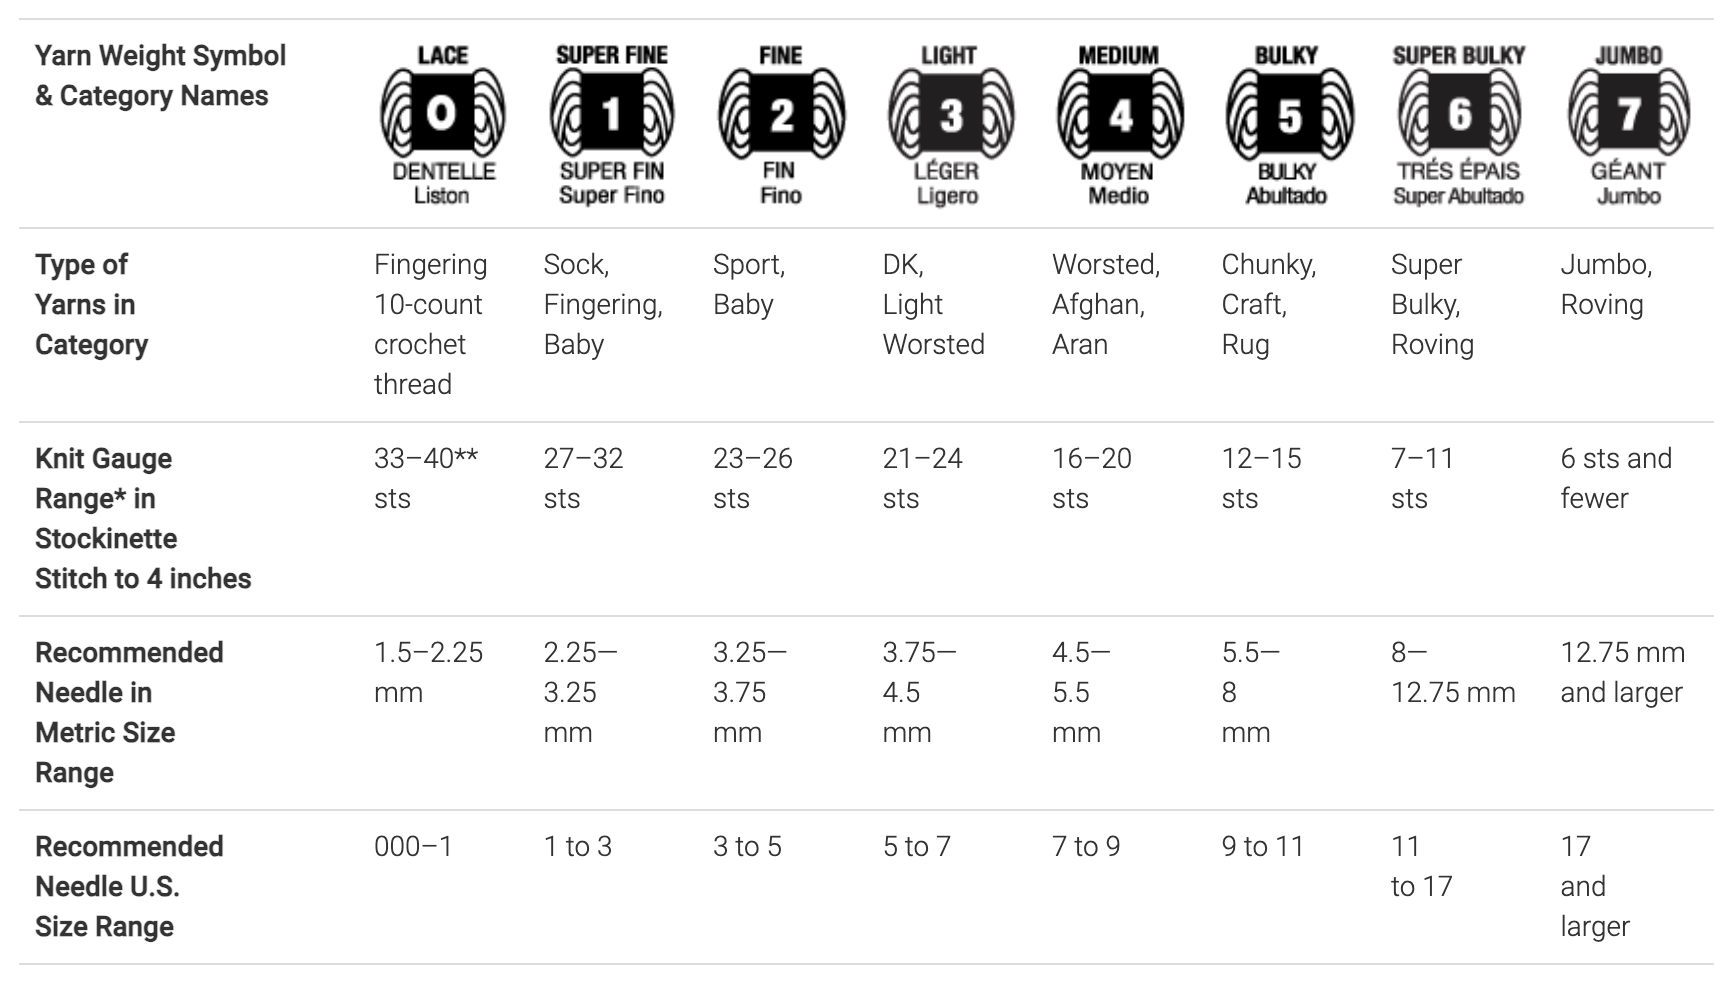 Beginner's Guide to the Standard Yarn Weight System - Yay For Yarn